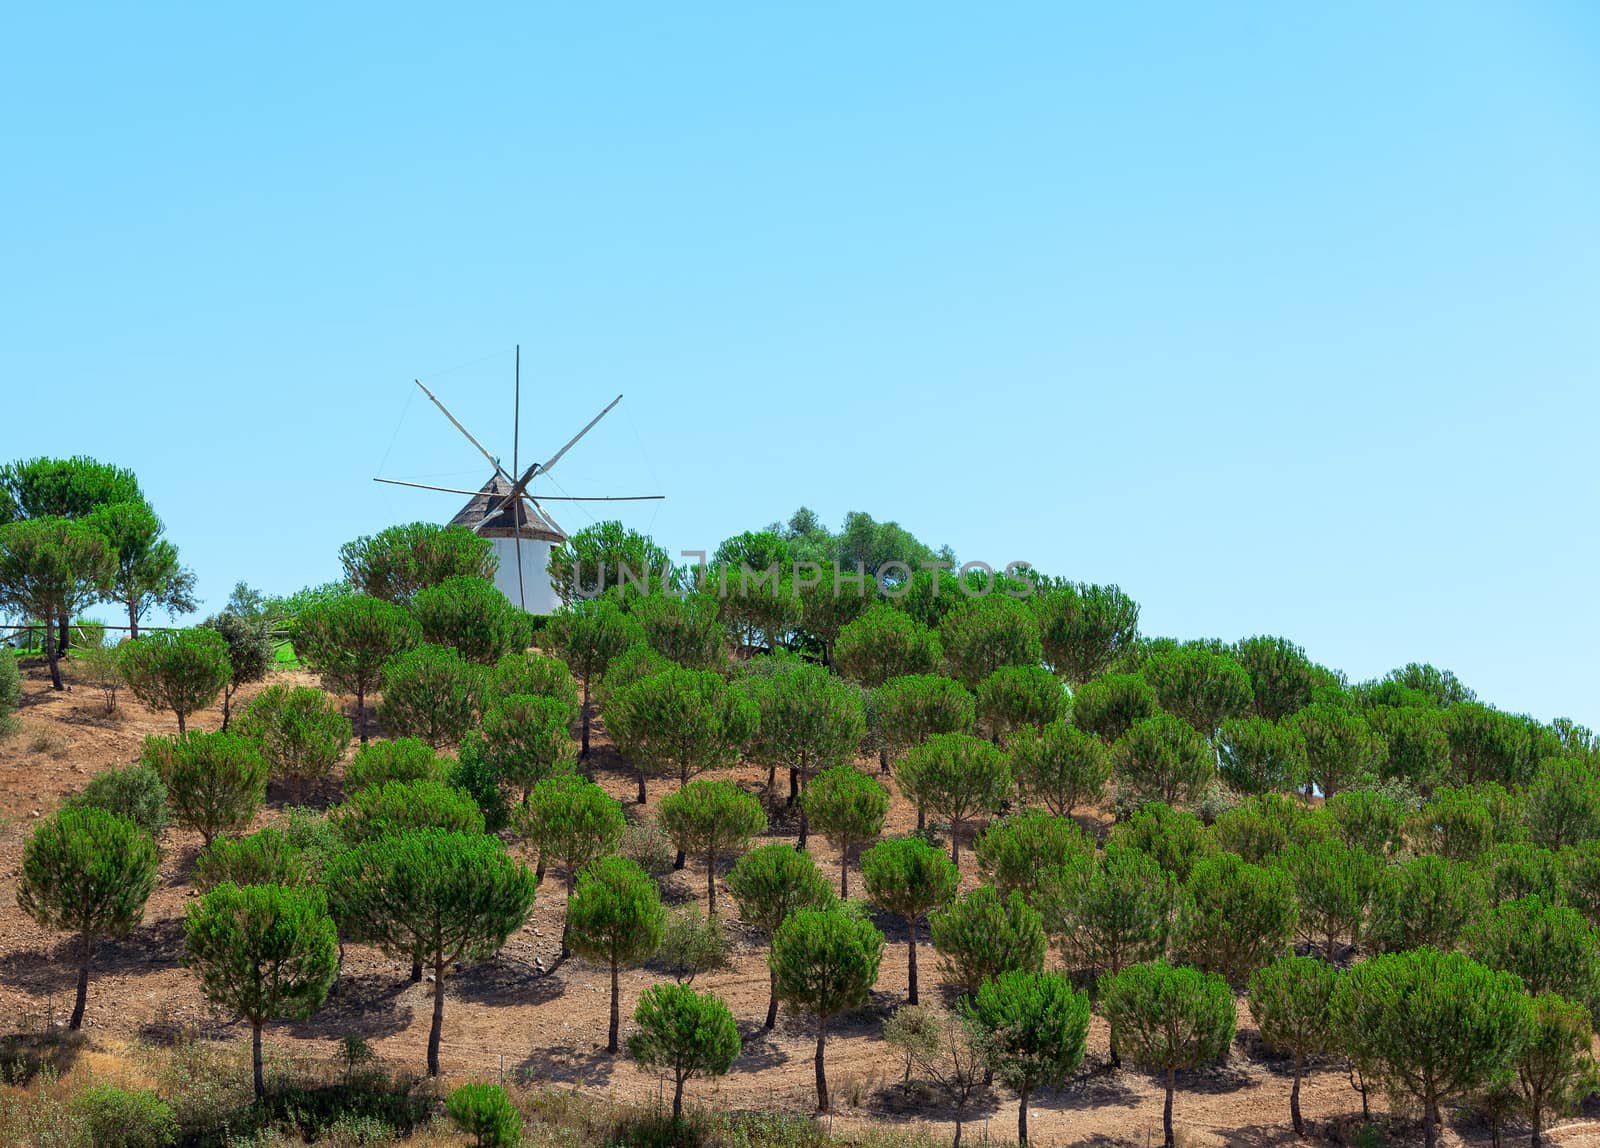 Windmill above a plantation of trees by Discovod